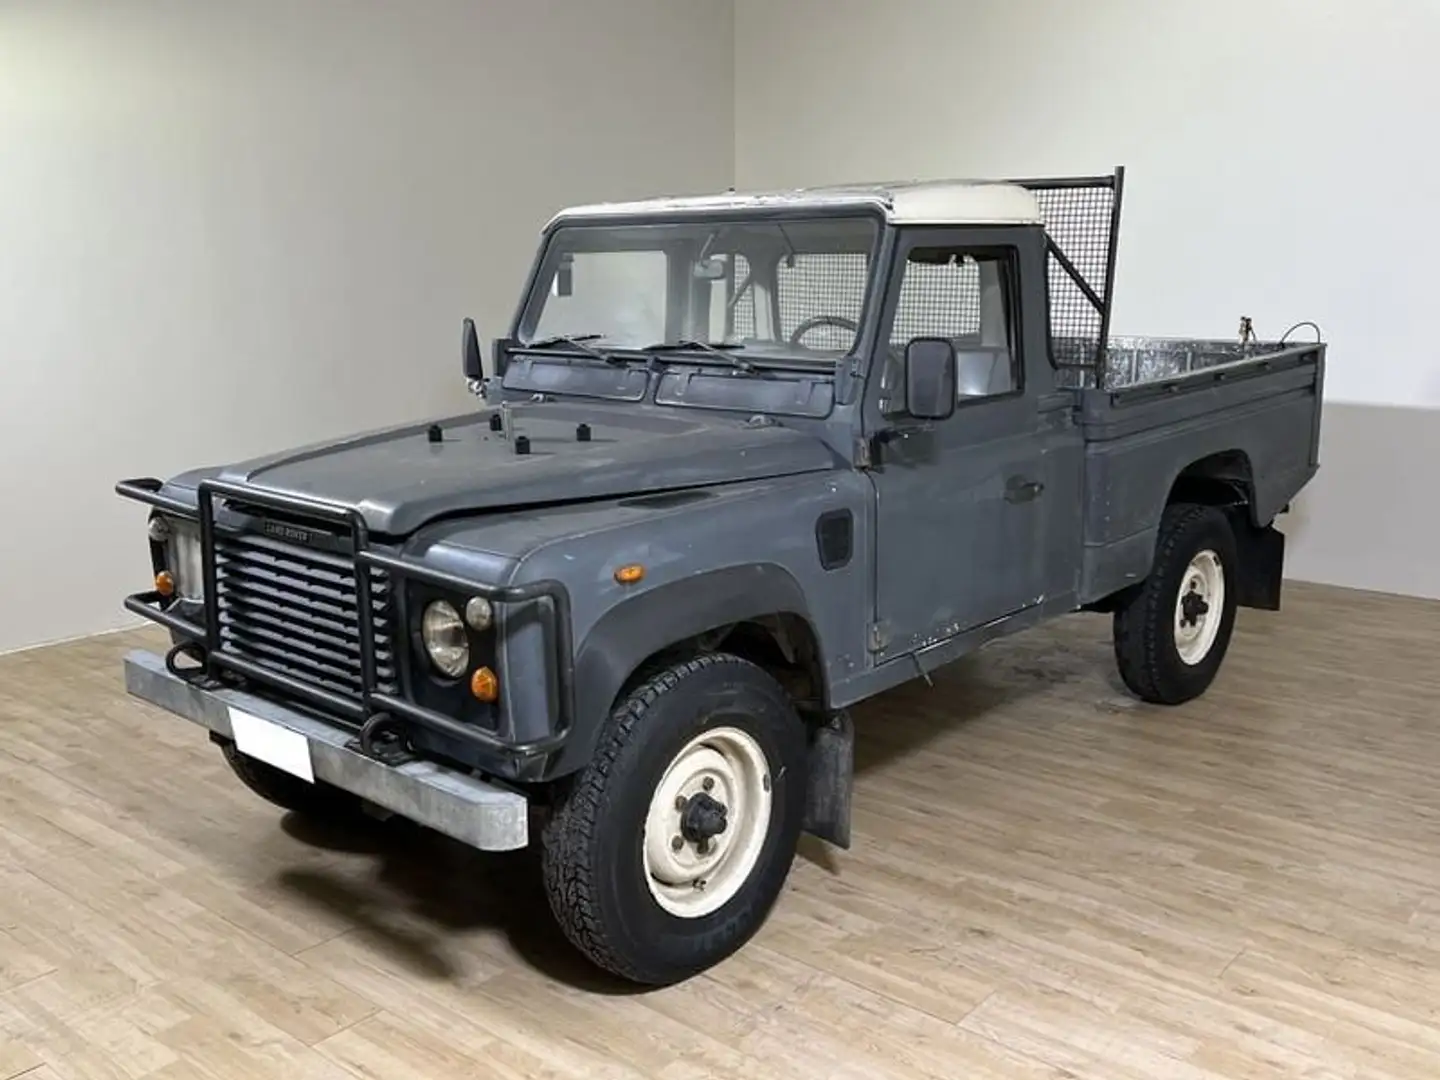 Land Rover Defender 110 turbodiesel Pick-up High Capacity siva - 1